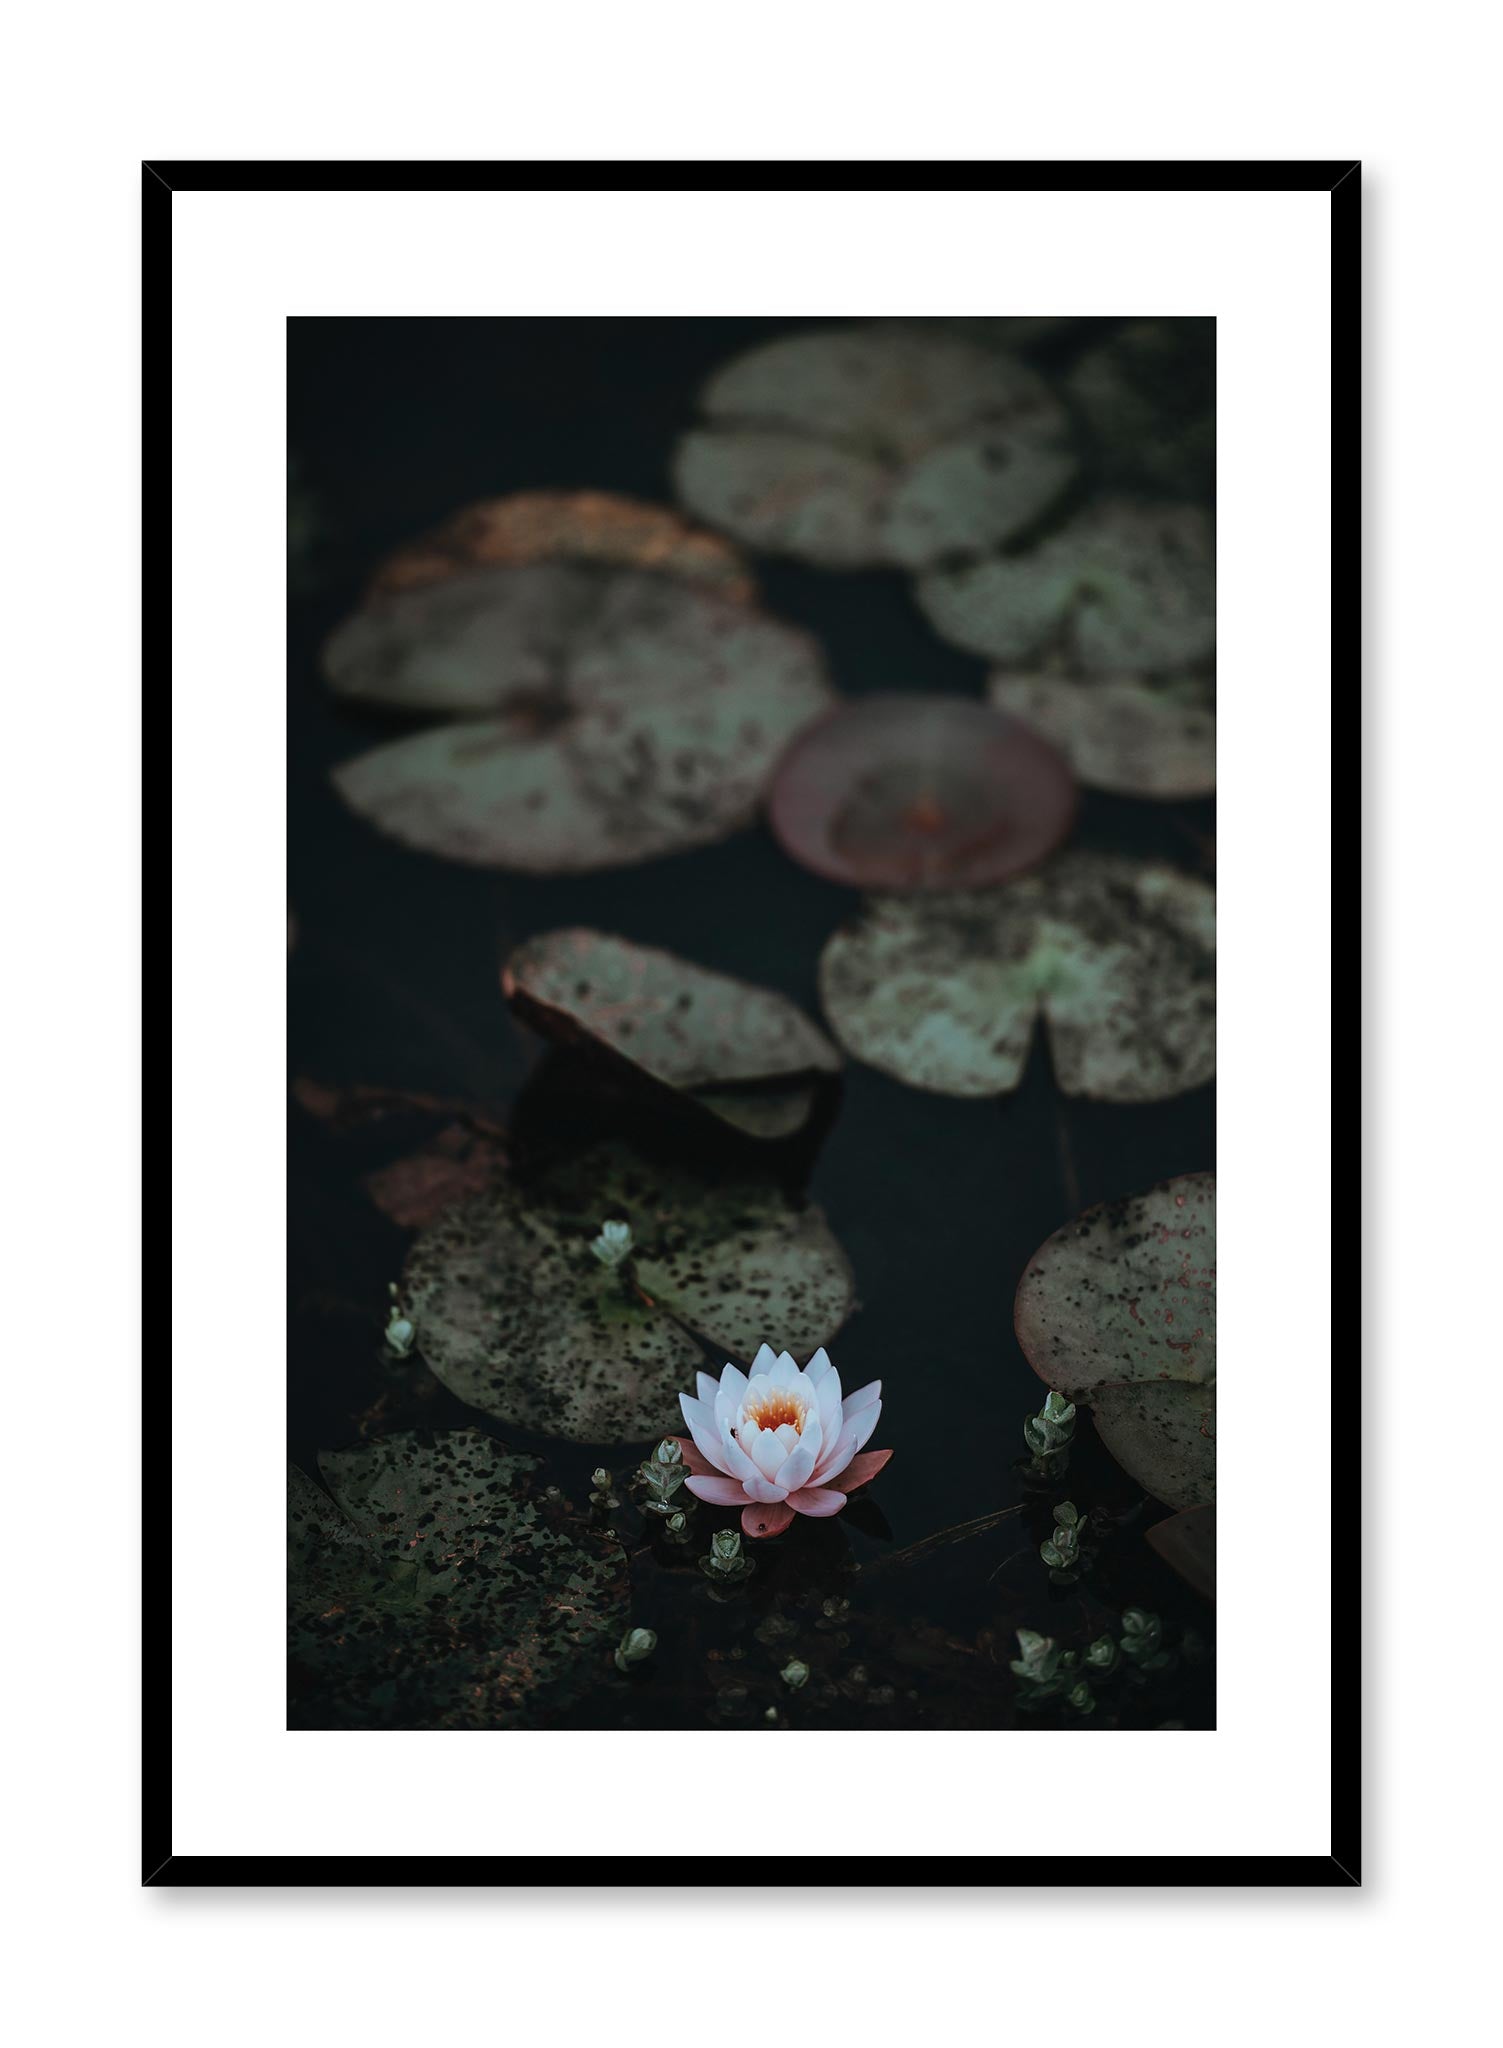 Lily Pad is a minimalist illustration by Opposite Wall of a single pink water lily surrounded by many lily pads in a pond.